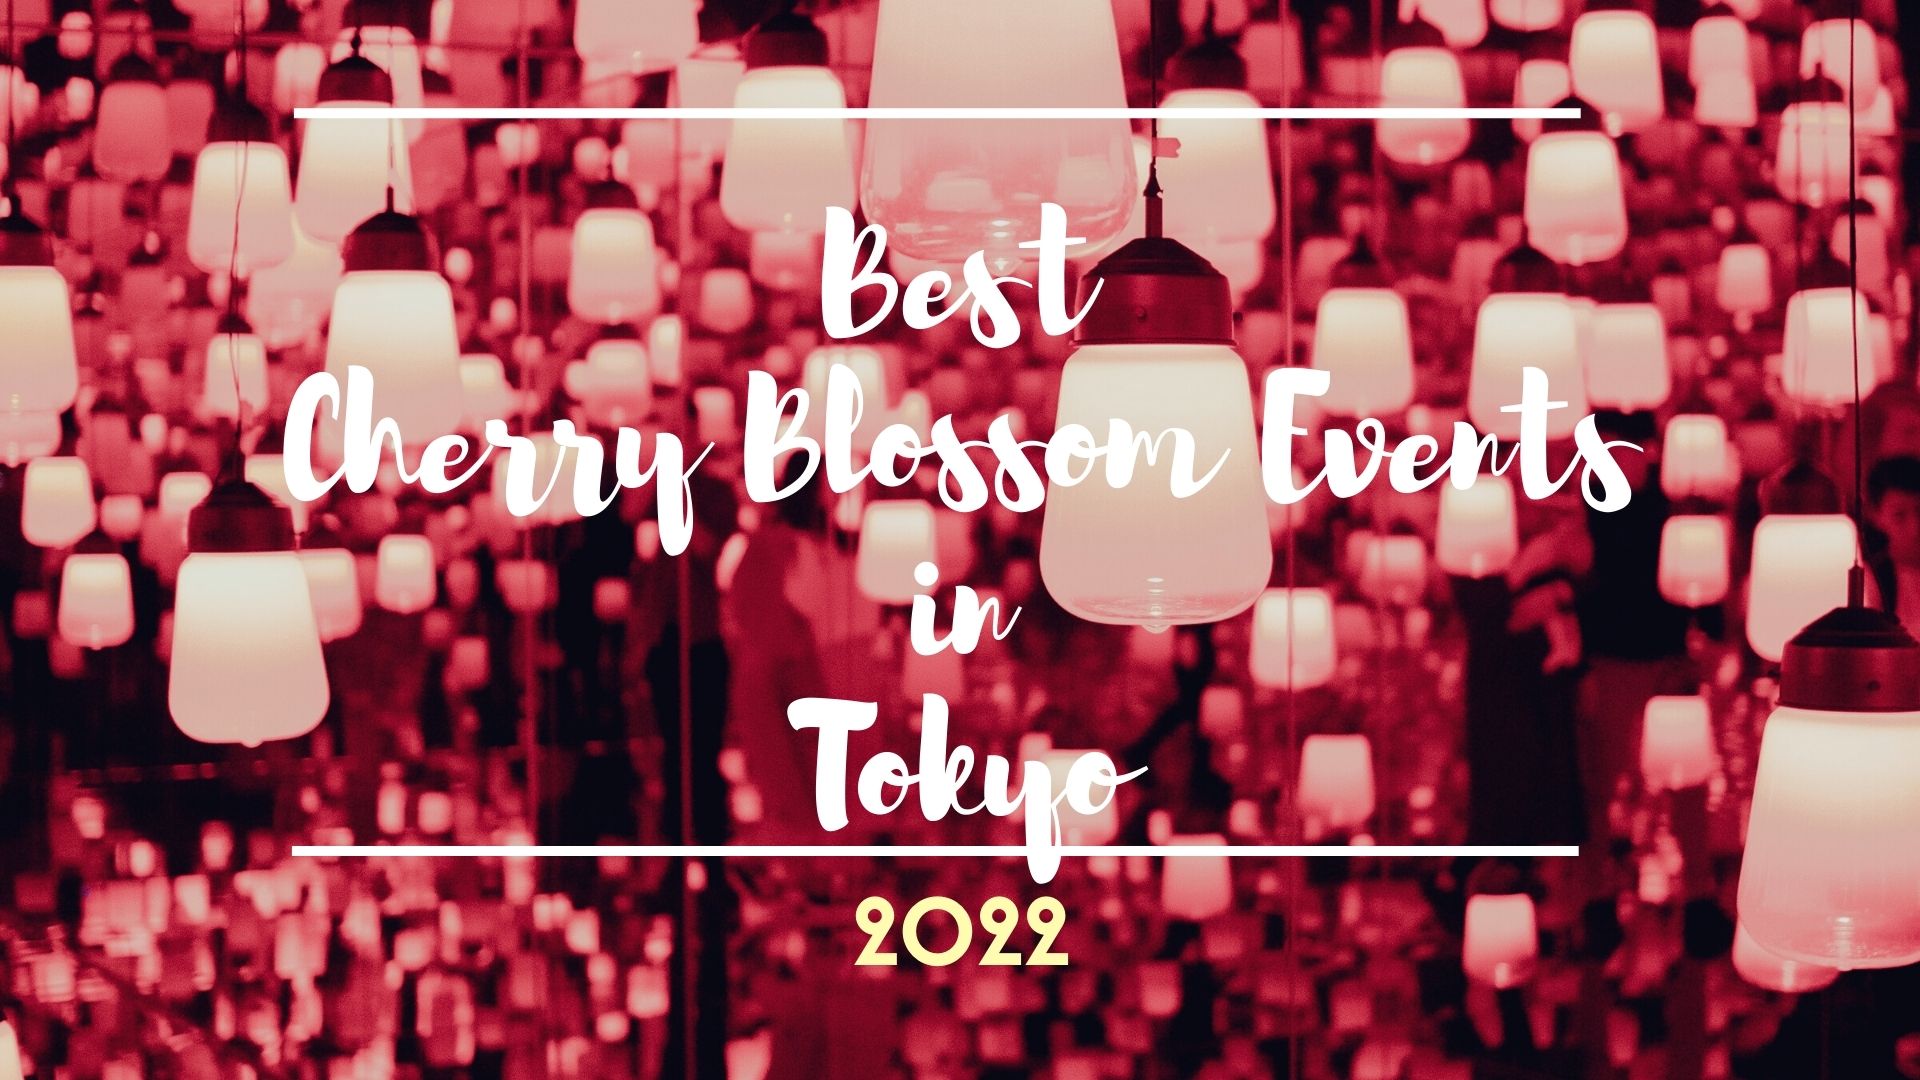 Best Cherry Blossom Events in Tokyo 2022